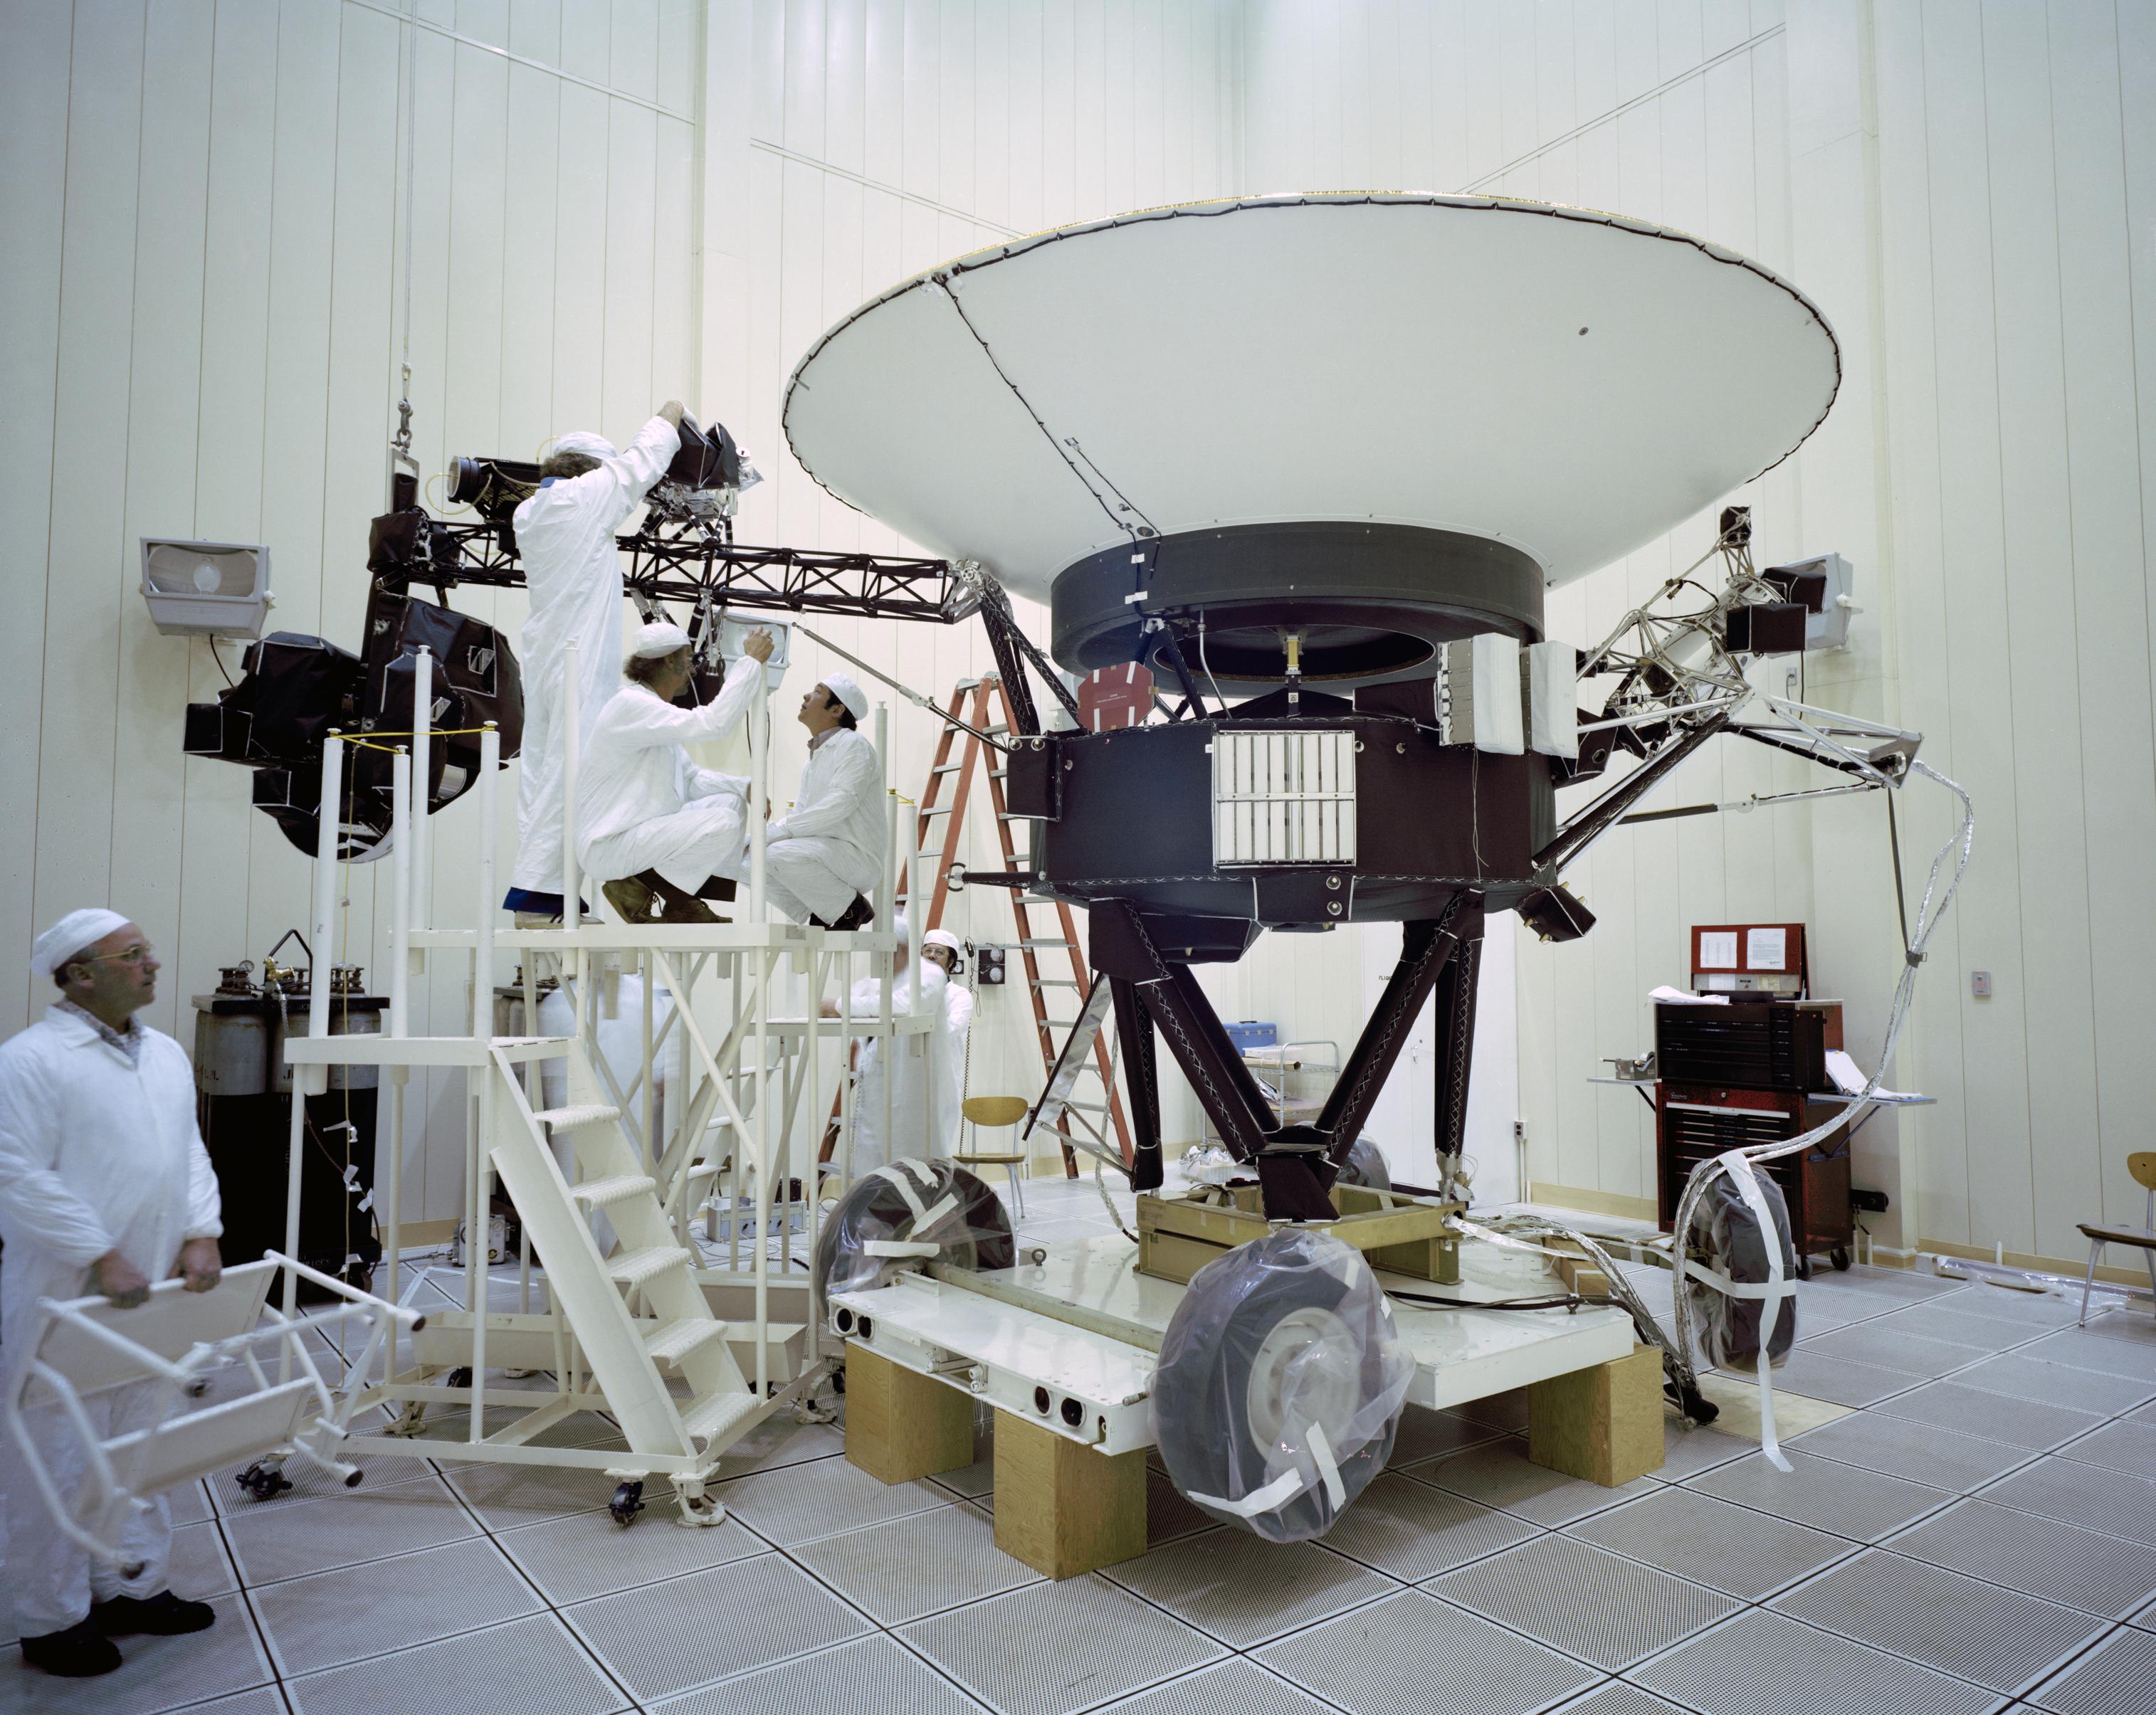 Engineers working on NASA's Voyager 2 spacecraft inside a lab